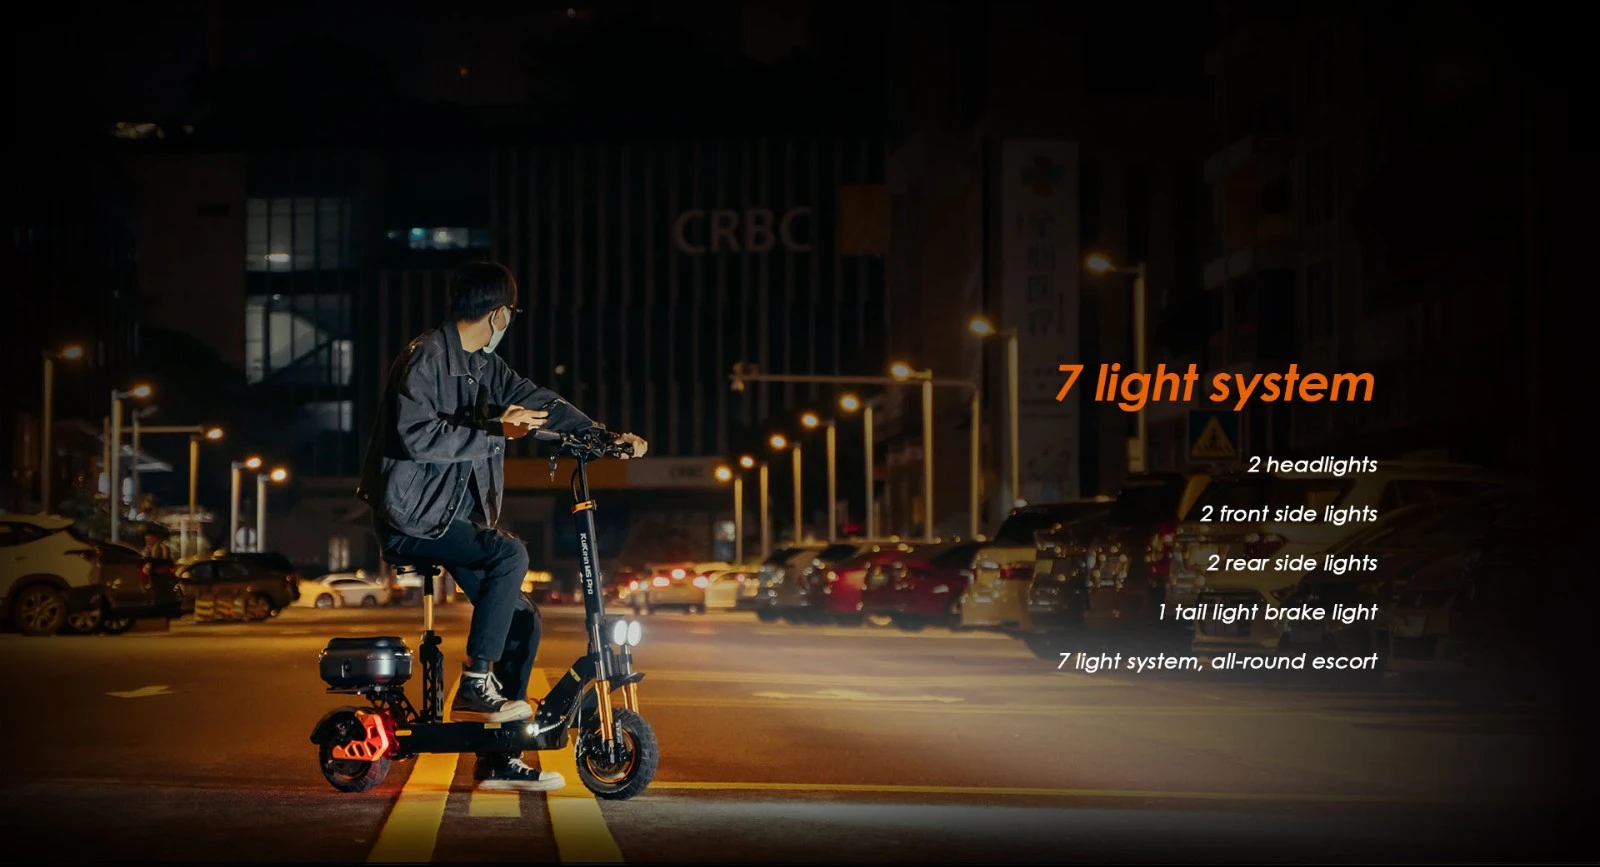 KuKirin M5 Pro Electric Scooter 1000W Motor 52Km/h Max Speed 48V 20Ah Battery With 70KM Range, Dual Disc Brakes, 7 Lights, Multiple Speed Modes 120KG Max Load with Detachable Seat